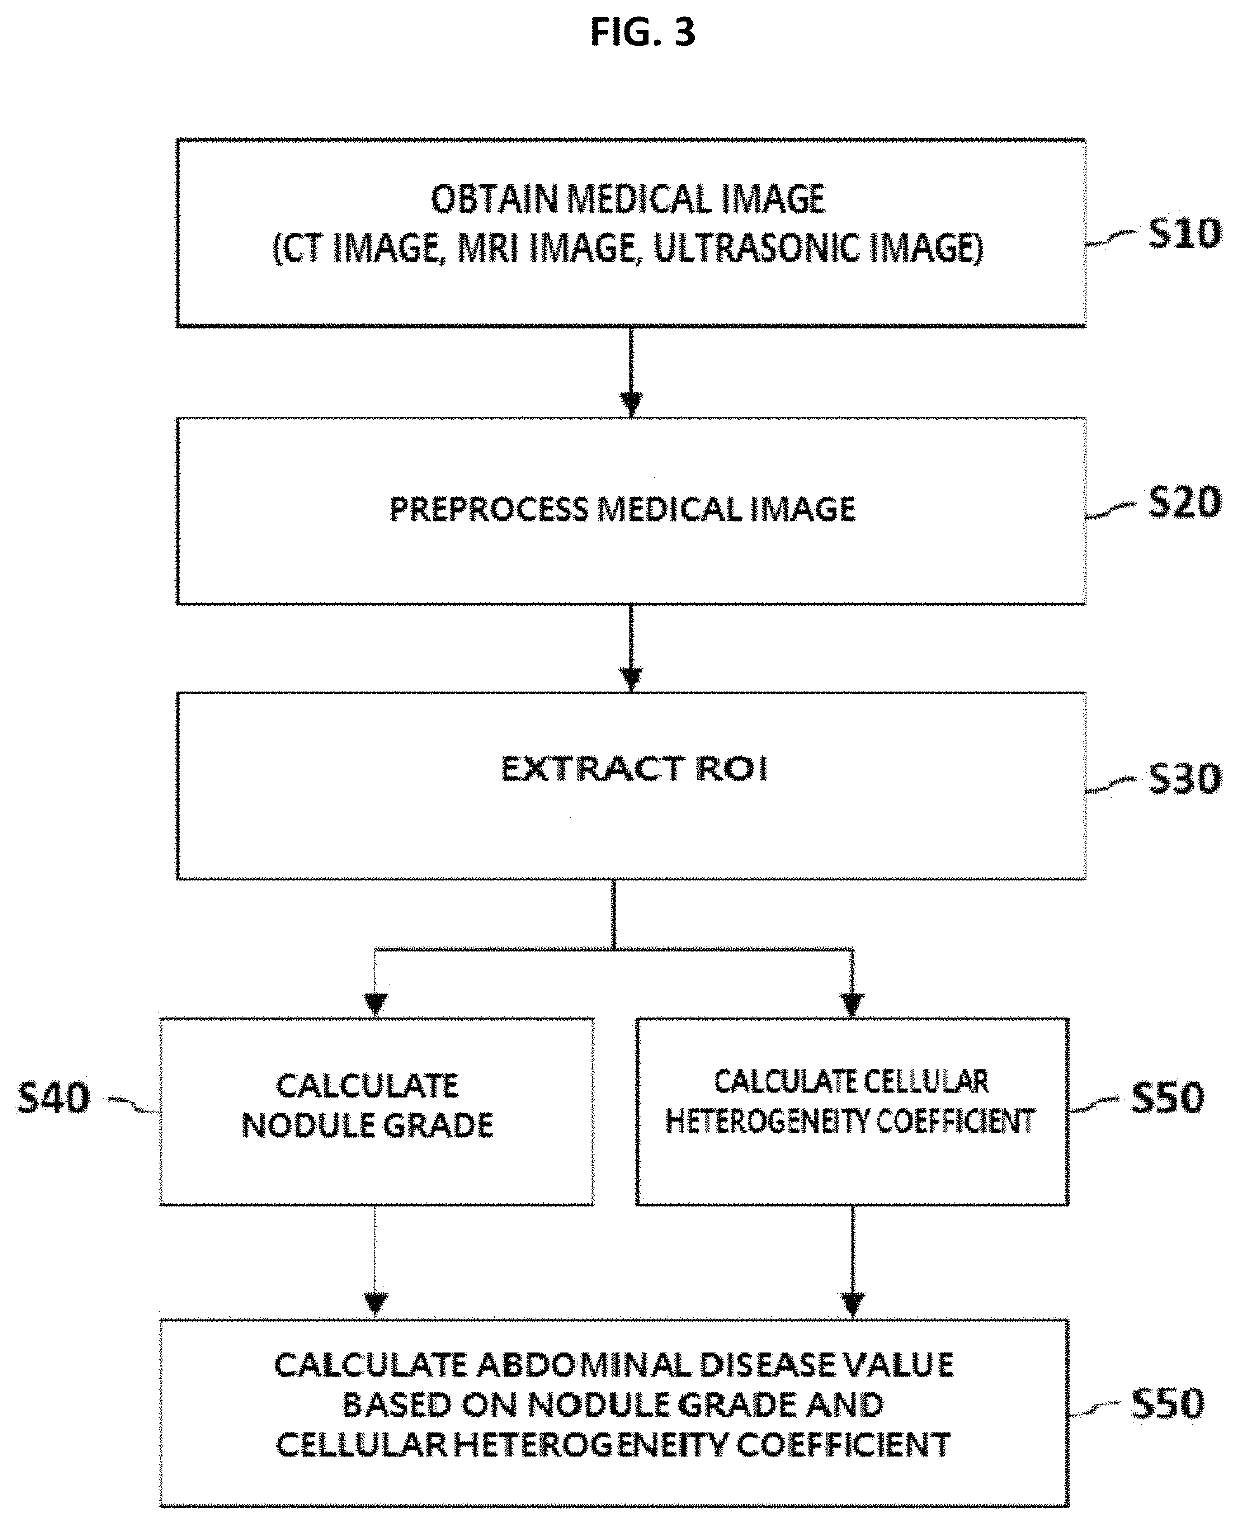 Method and apparatus for calculating abdominal disease diagnosis information based on medical image